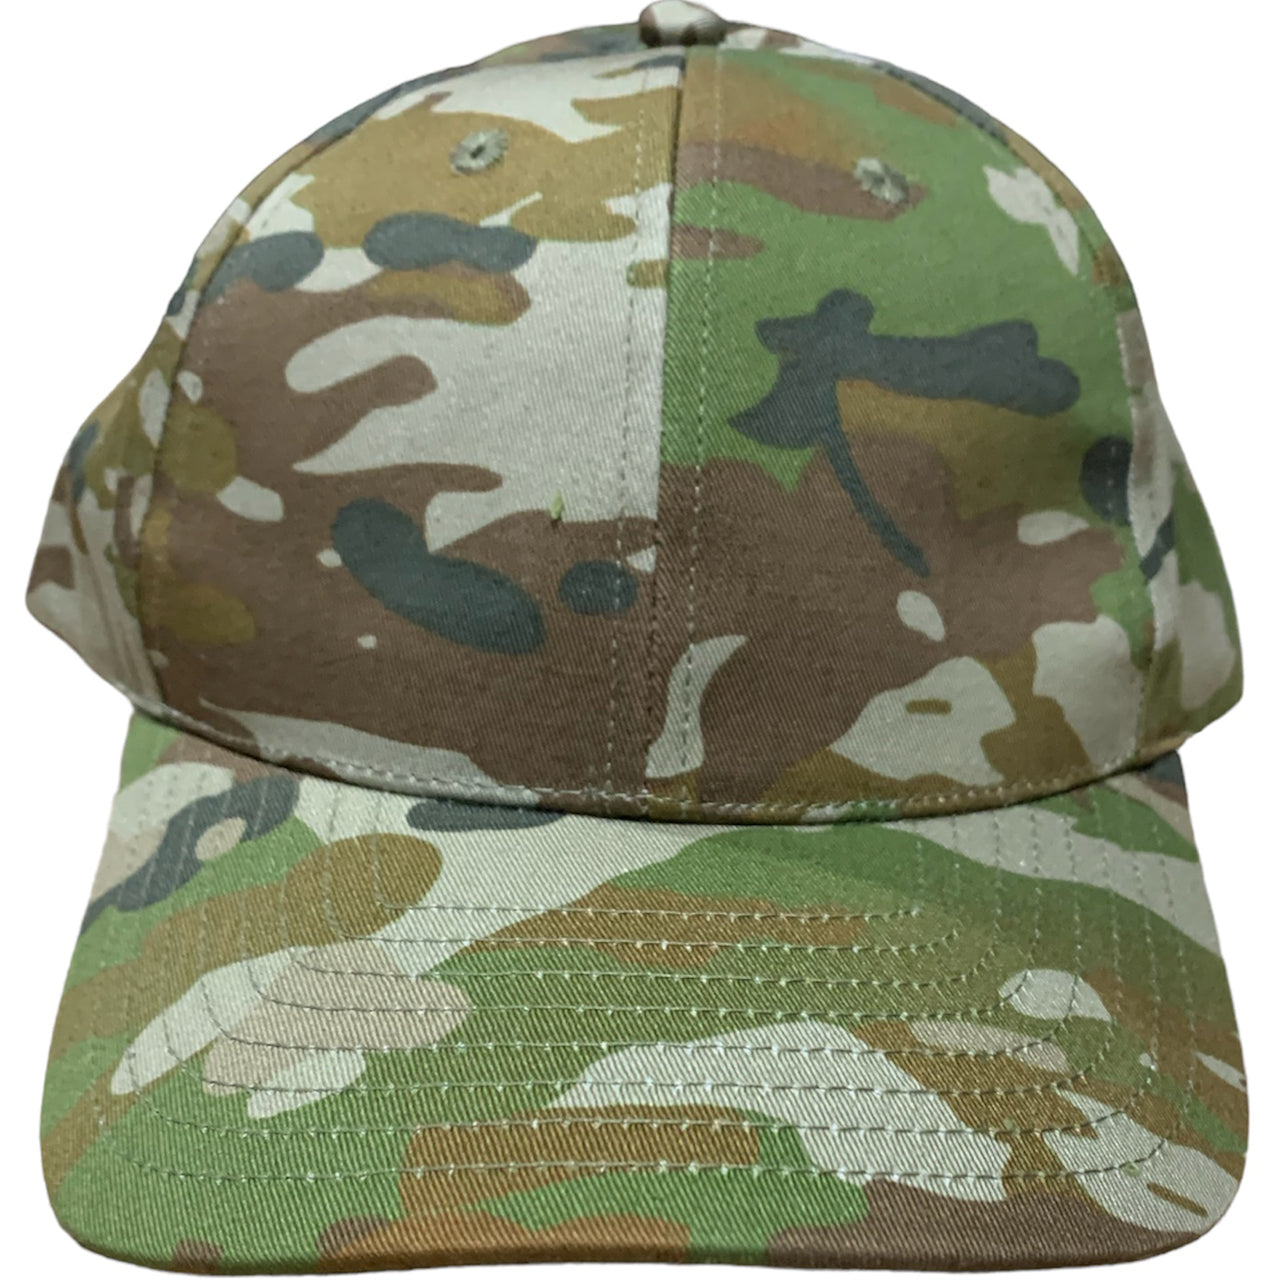 Experience the ultimate in comfort and style with the Army Australian Multicam Baseball Cap. This cap features an adjustable hook & loop back for a perfect fit, making it a One Size Fits All option. Upgrade your headwear game with this versatile and trendy cap! www.defenceqstore.com.au front view